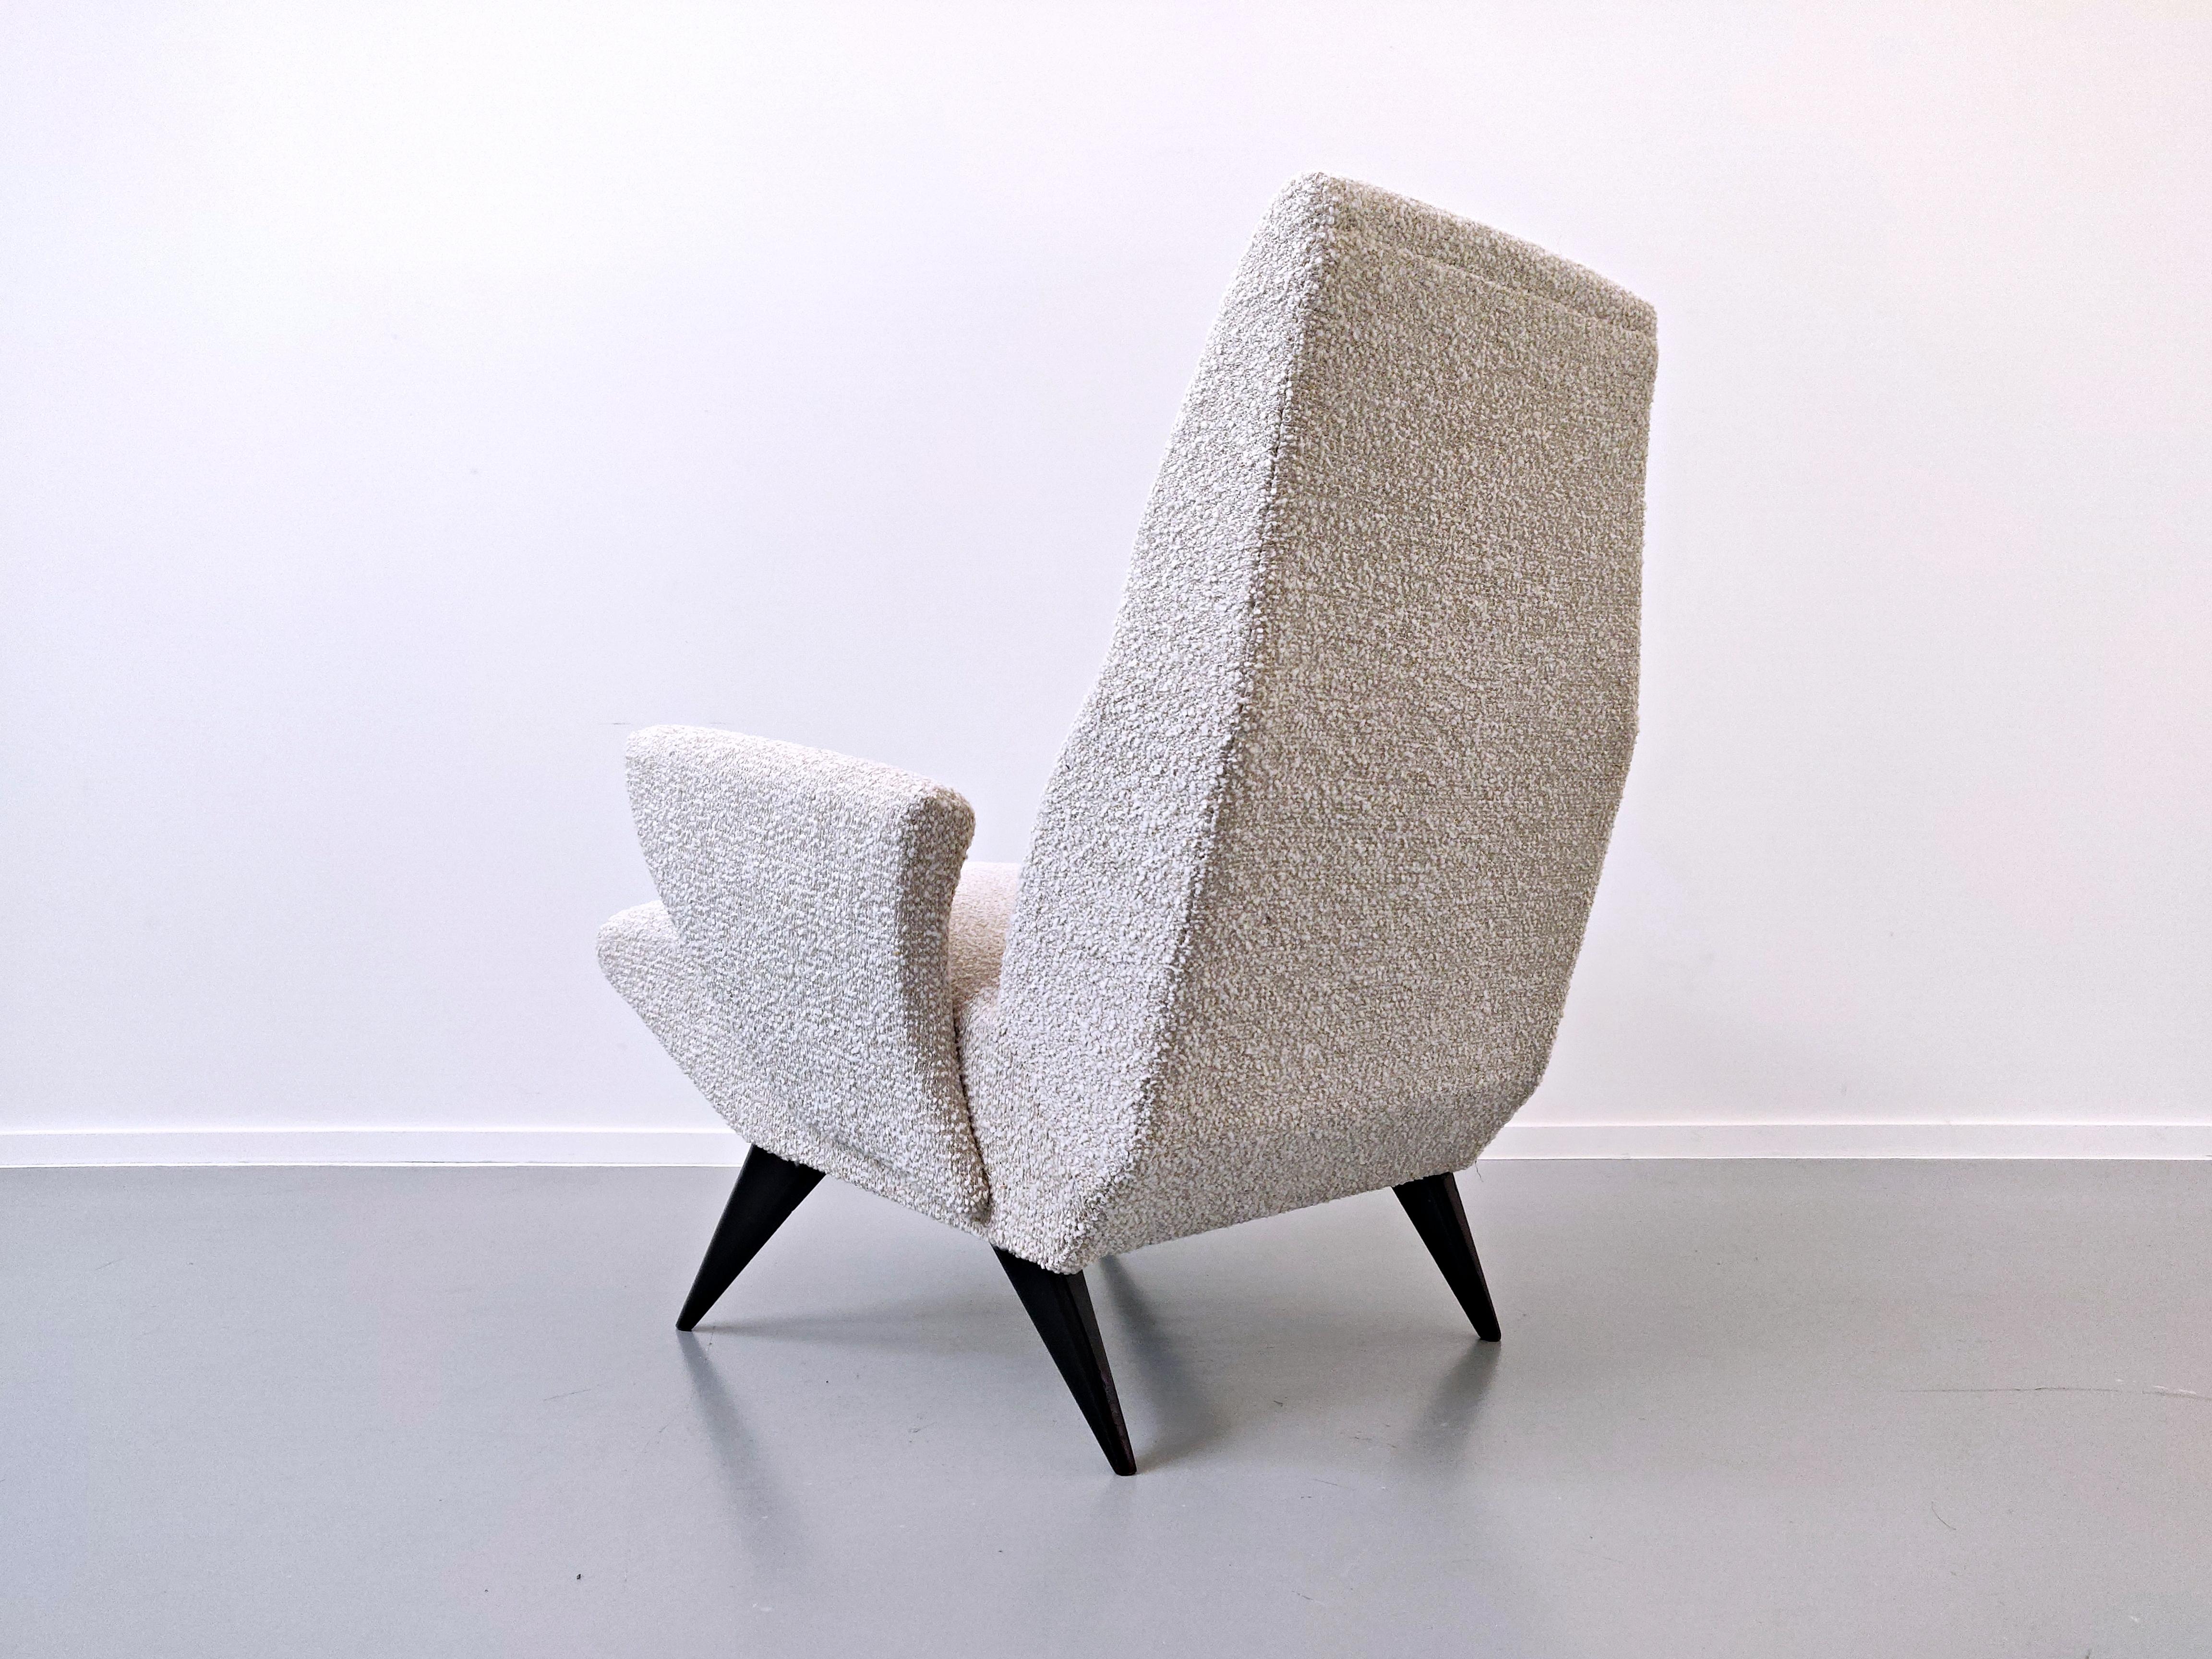 Textile Pair of Mid-Century Modern  Armchairs by Nino Zoncada for Frimar, Italy  For Sale